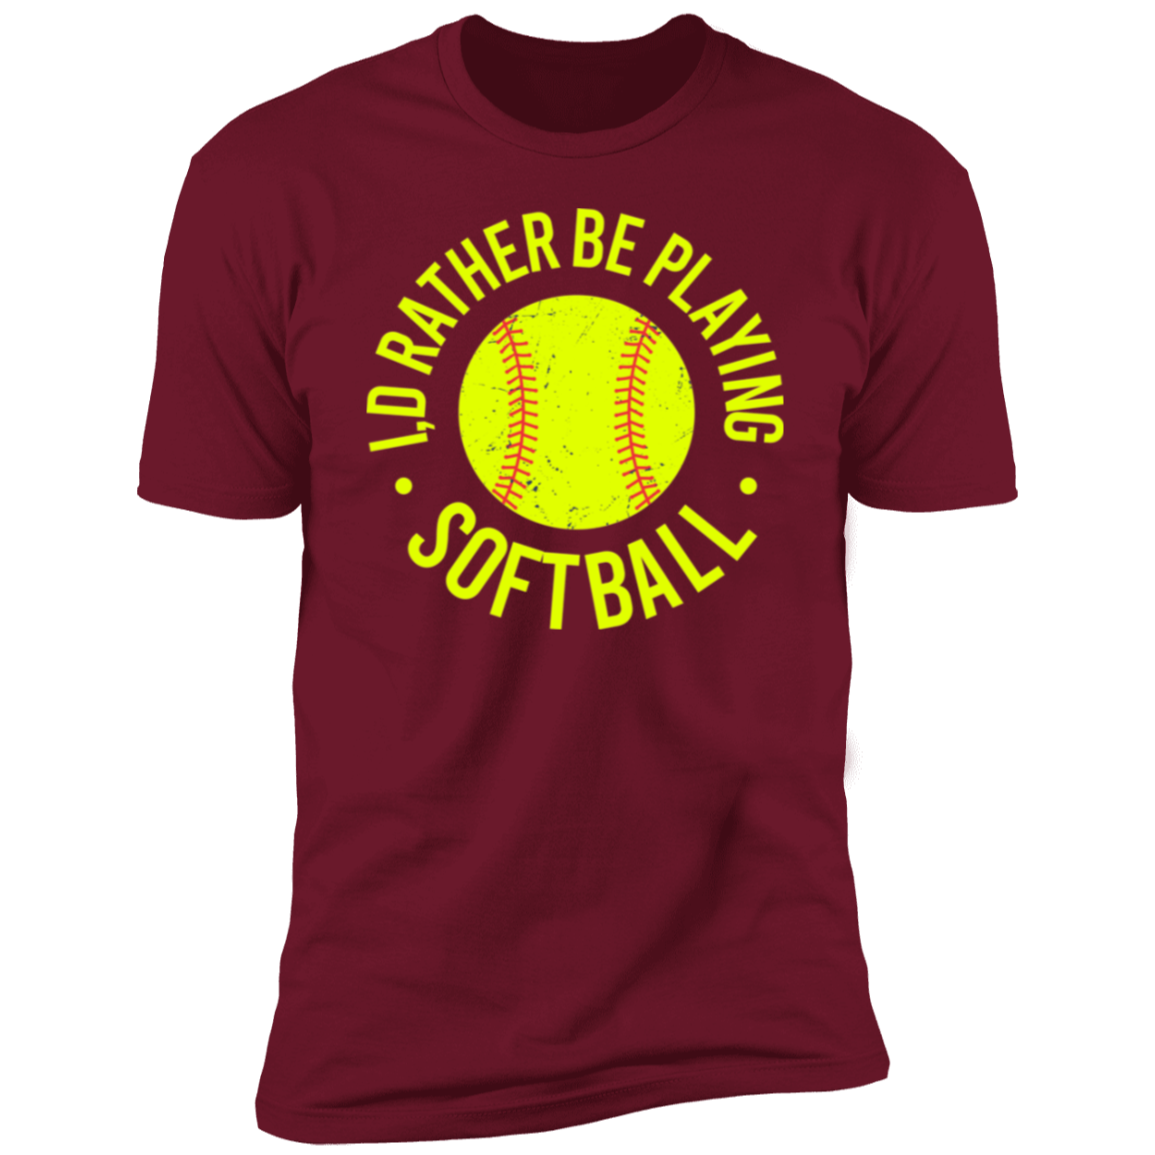 Rather Be Playing Softball Premium Men's Tee - Game Day Getup